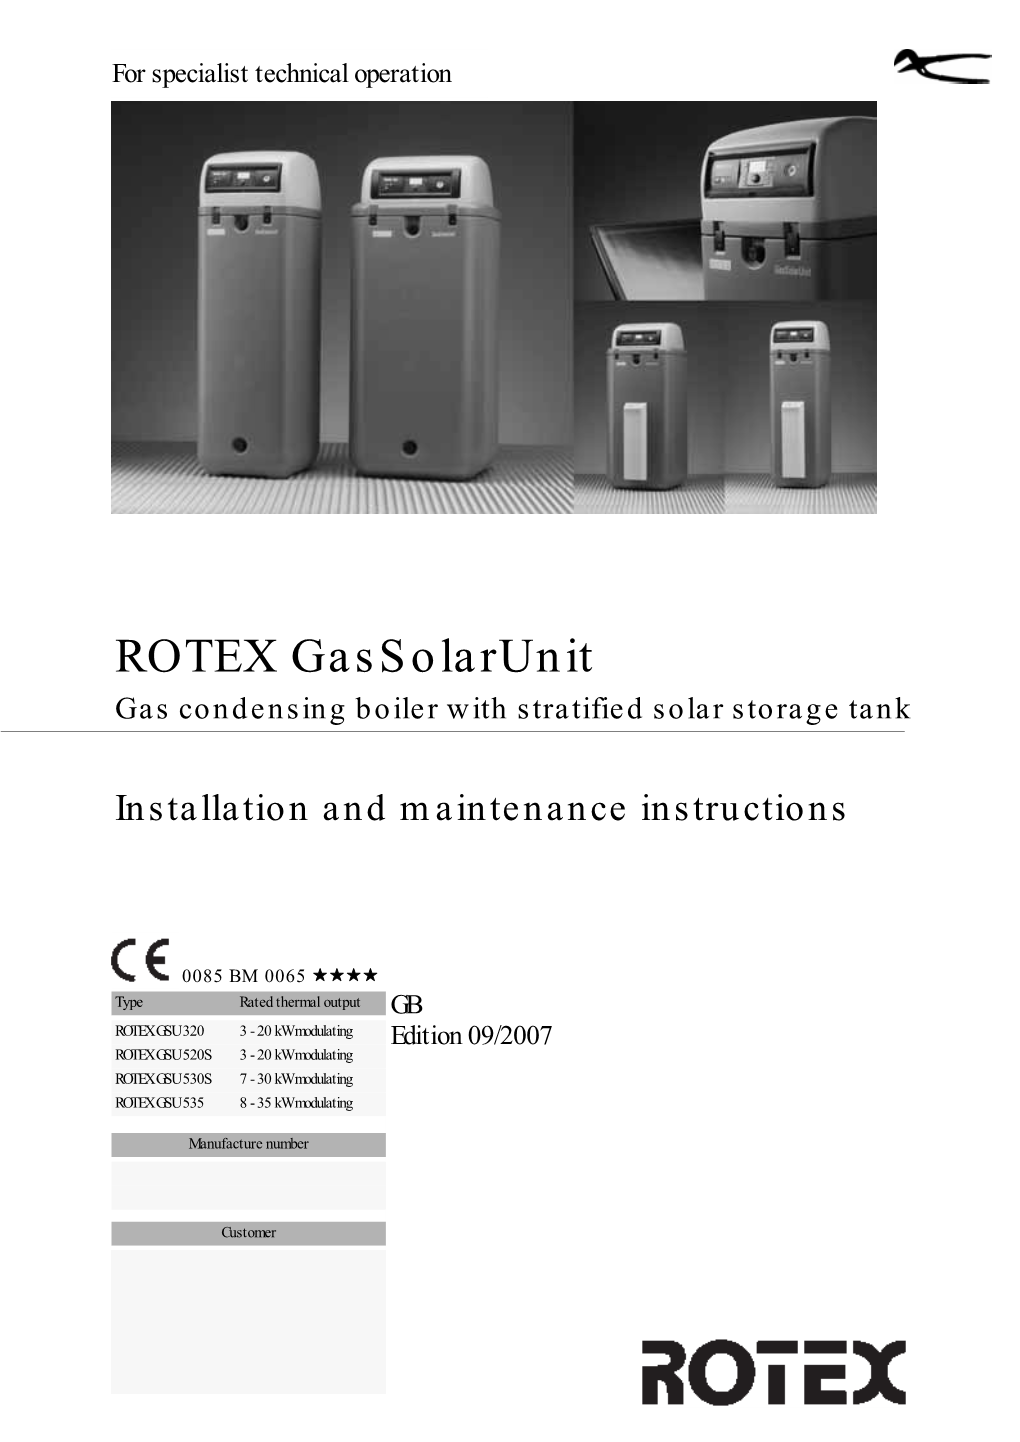 ROTEX Gassolarunit Gas Condensing Boiler with Stratified Solar Storage Tank